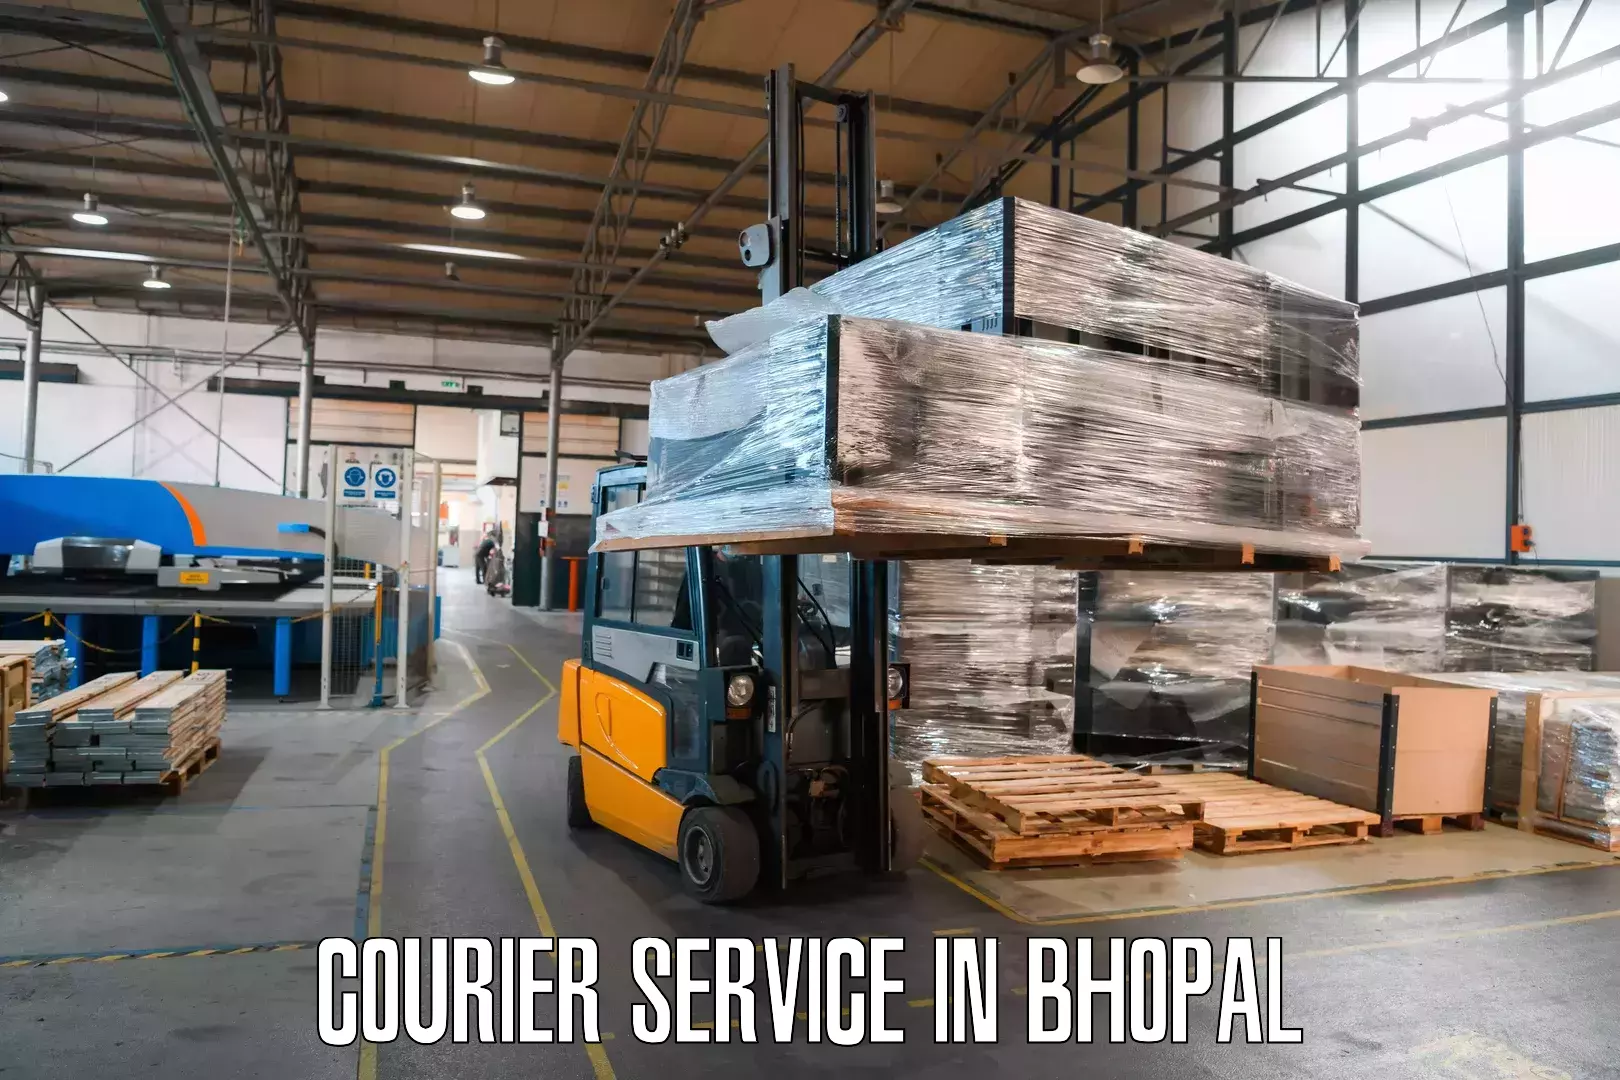 High-speed delivery in Bhopal